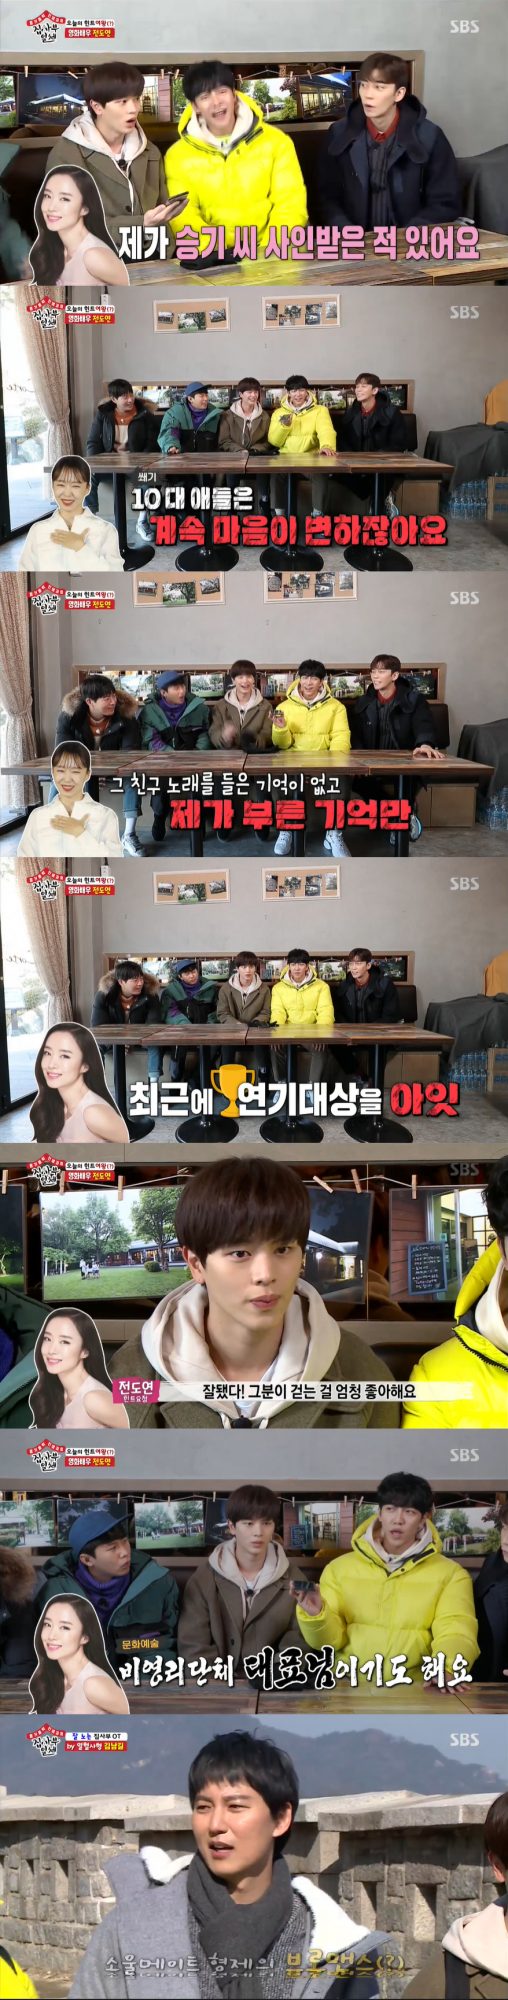 Actor Jeon Do-yeon appeared as a hint fairy in All The Butlers, which was broadcast on the 9th.Yang Se-hyeong said, I think I know this man.I thought he didnt appear well in the entertainment show, but he didnt show up on the talk program a while ago. The hint fairy said, I think he did.Yang Se-hyeong said, 100 out of 100 comedians know how to simulate his vocal cords.Lee Seung-gi, who noticed Identity in a cool laugh, asked, Is it not Jeon Do-yeon? The hint fairy replied, Yes.The members cheered.Lee Seung-gi asked, Is not there a relationship with me before?Ive been signed by Lee Seung-gi before, said Jeon Do-yeon.My daughter was so fond of seeing Lee Seung-gis drama that she was signed as a fan, explained Jeon Do-yeon.When the foster child asked, Does your daughter still like it? Jeon Do-yeon laughed in silence. The teens keep changing their minds, said Jeon Do-yeon.Were busy with our public relations, said Jeon Do-yeon, who is about to release the movie The Animals Who Want to Hold the Jeep.Jeon Do-yeon said he would invite members of All The Butlers to the premiere.Shin Sung-rok tried to call Jeon Do-yeon Madame and to get in touch.I should introduce the master once, said Jeon Do-yeon, who said of the master that appeared on the day, I have done the same thing with me.Its a nice thing to meet you like I saw yesterday, and Ive been chatting and going to karaoke, he said.When Lee Seung-gi asked if he was a lot of excitement, Jeon Do-yeon replied, Its a lot of excitement.When Lee Seung-gi asked, What songs do you usually choose?, Jeon Do-yeon hesitated and said, There is no memory to hear that Friend song and only the memory I sang.Jeon Do-yeon gave a hint that he was Actor and also a representative of a five-year cultural and arts nonprofit organization.Did you wear comfortable shoes today? he said, he likes walking very much, and hell have to walk a little longer.Im feeling good, so Ill walk until tomorrow, he said.Ill give you a decisive hint, said Jeon Do-yeon, and recently (I received) the subject of the acting. The members quickly noticed the masters Identity.It was Actor Kim Nam-gil. You have a pleasant time, said Jeon Do-yeon.